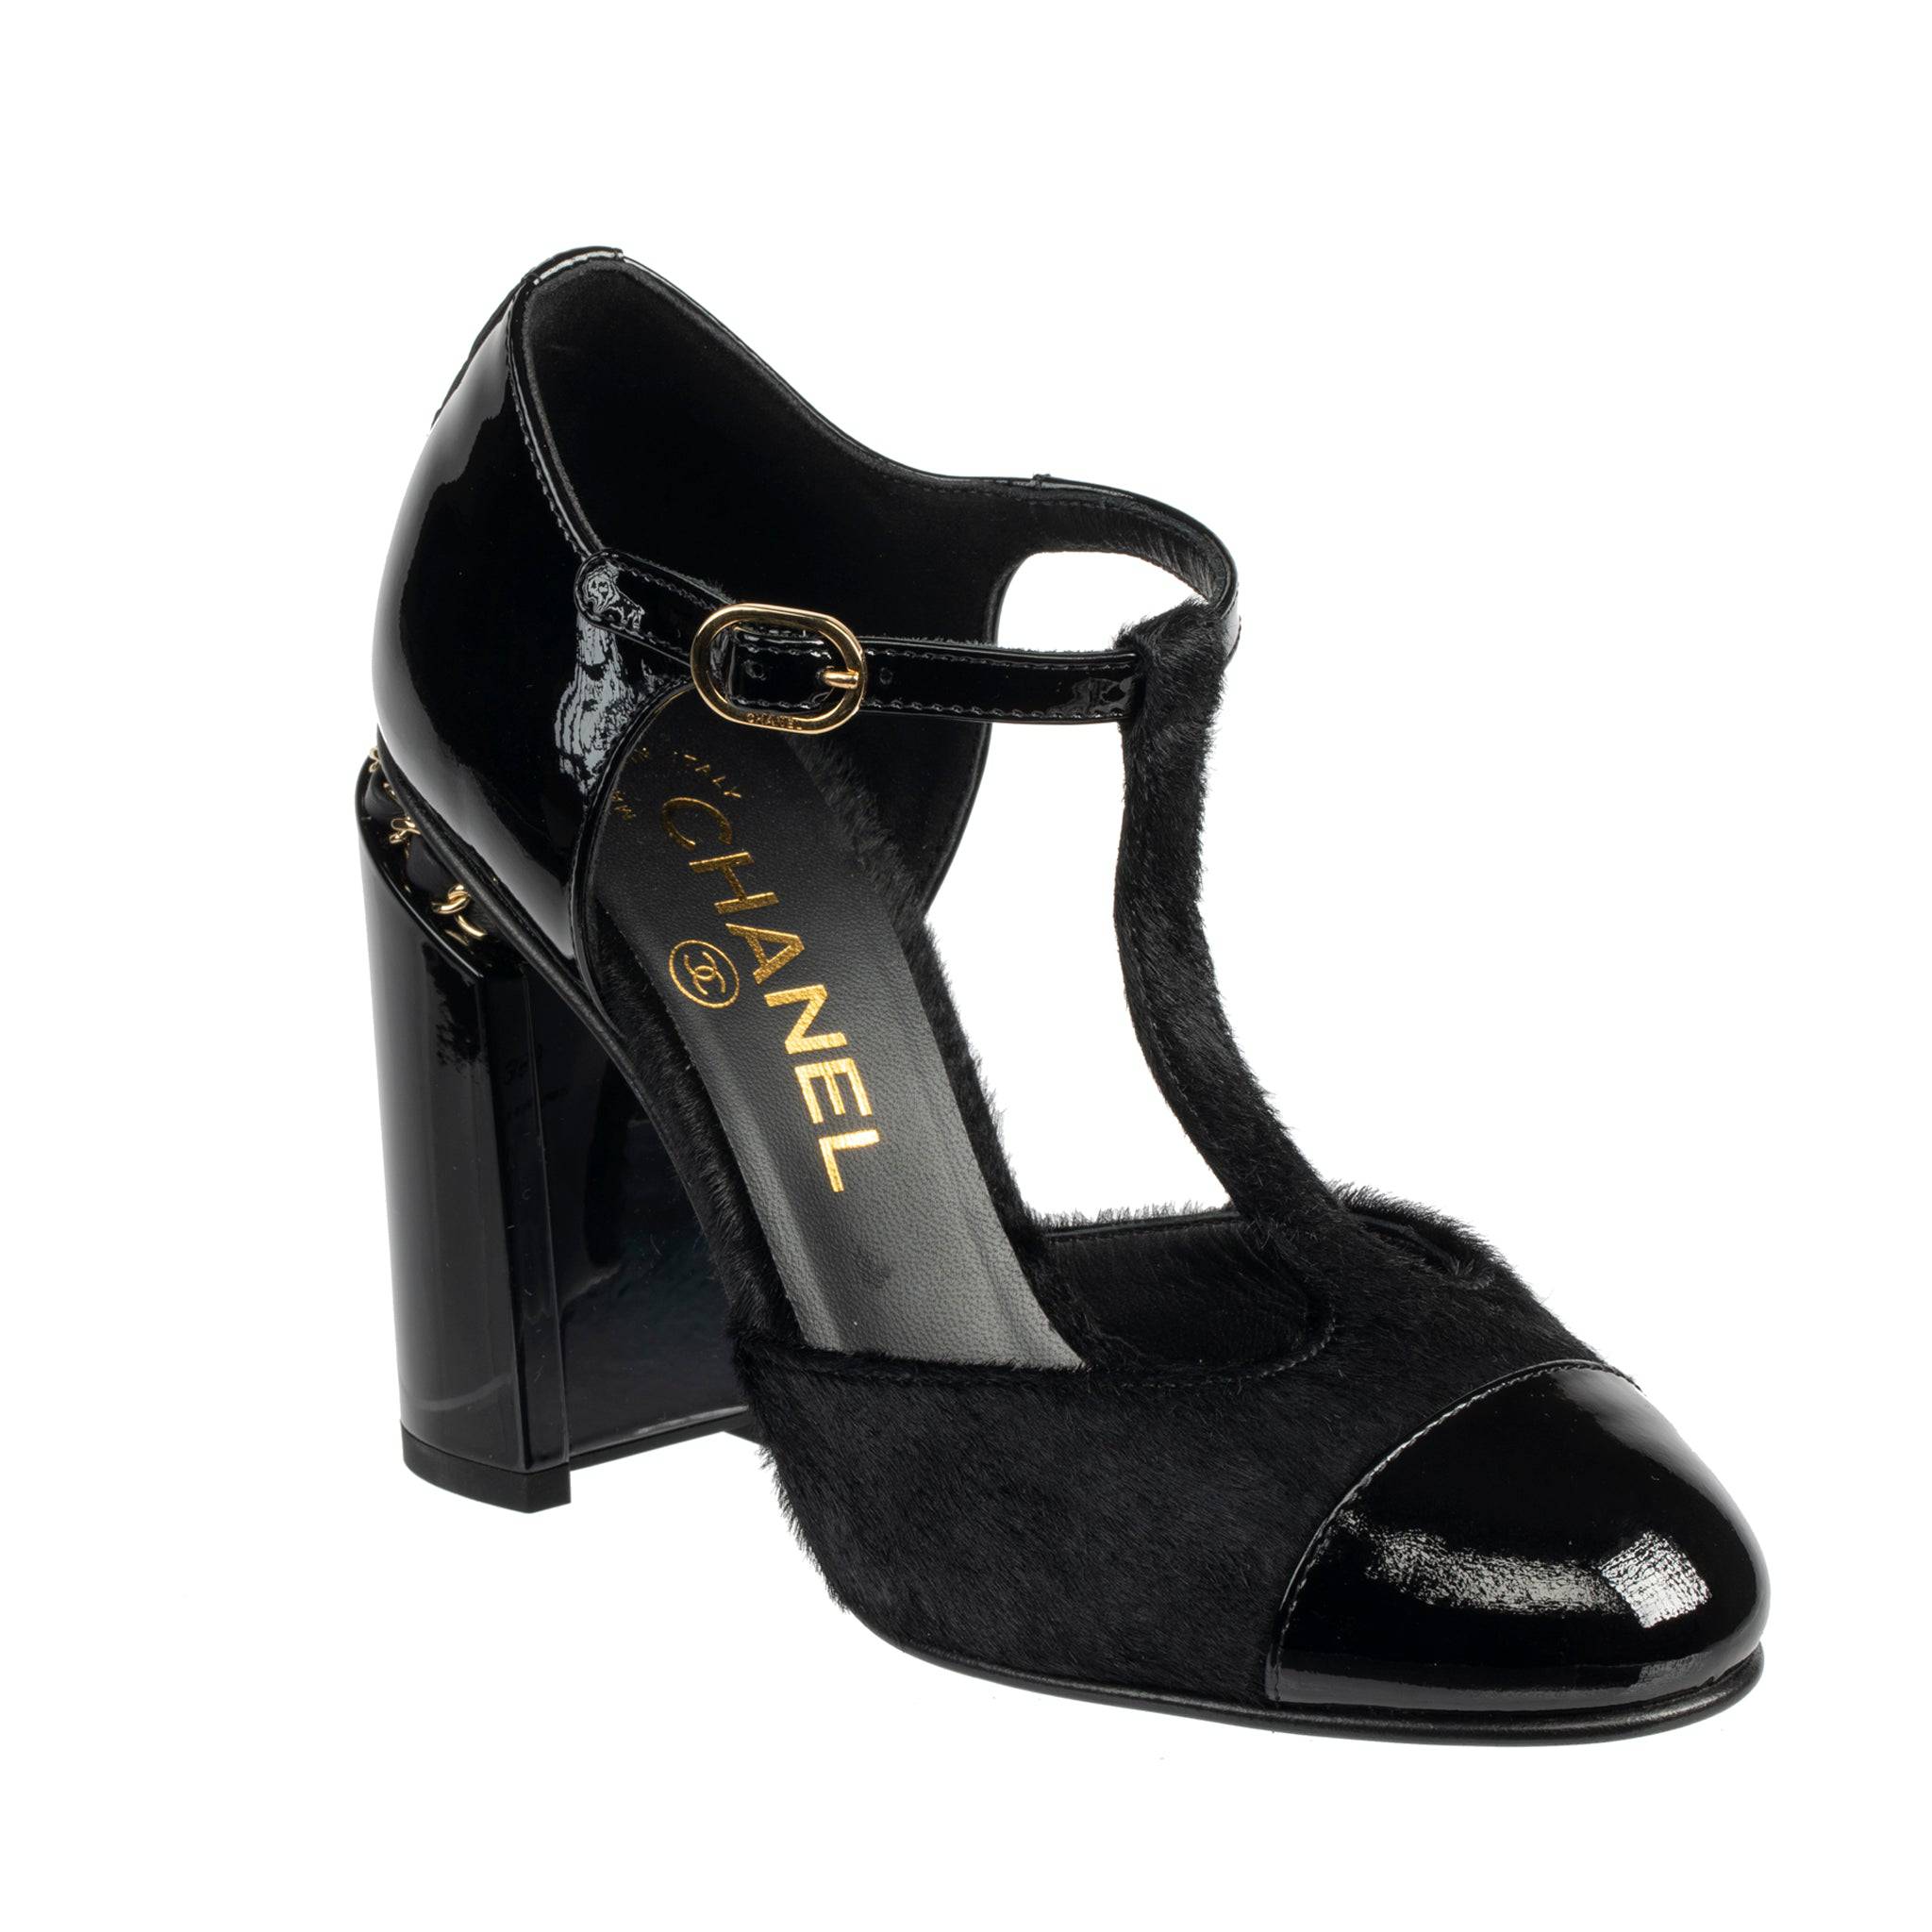 CHANEL PATENT LEATHER & PONY HAIR HEEL 36 FR - On Repeat